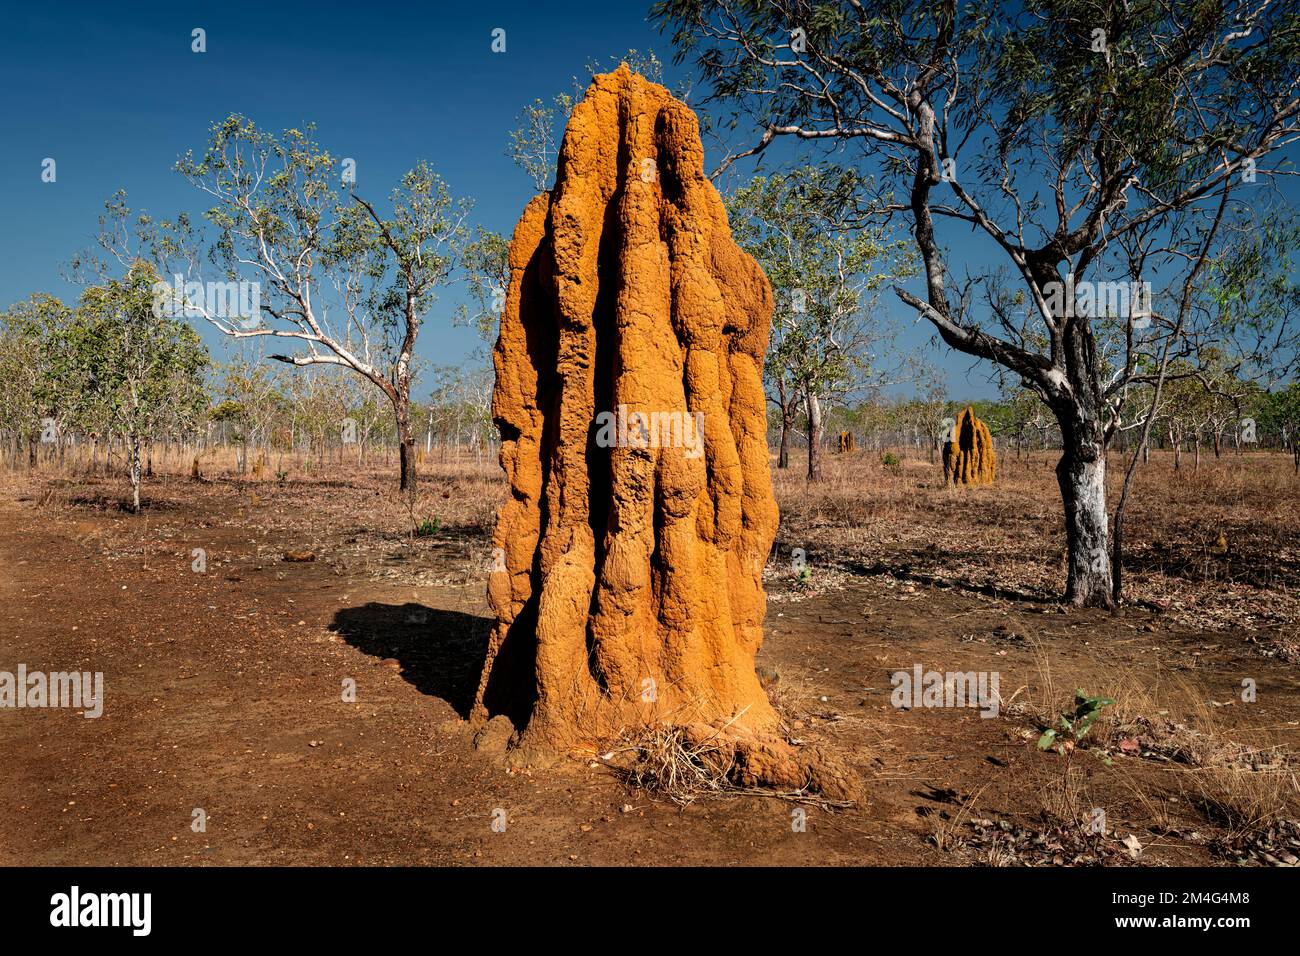 Riesige Cathedral Termite Mounds in Australiens Top End. Stockfoto